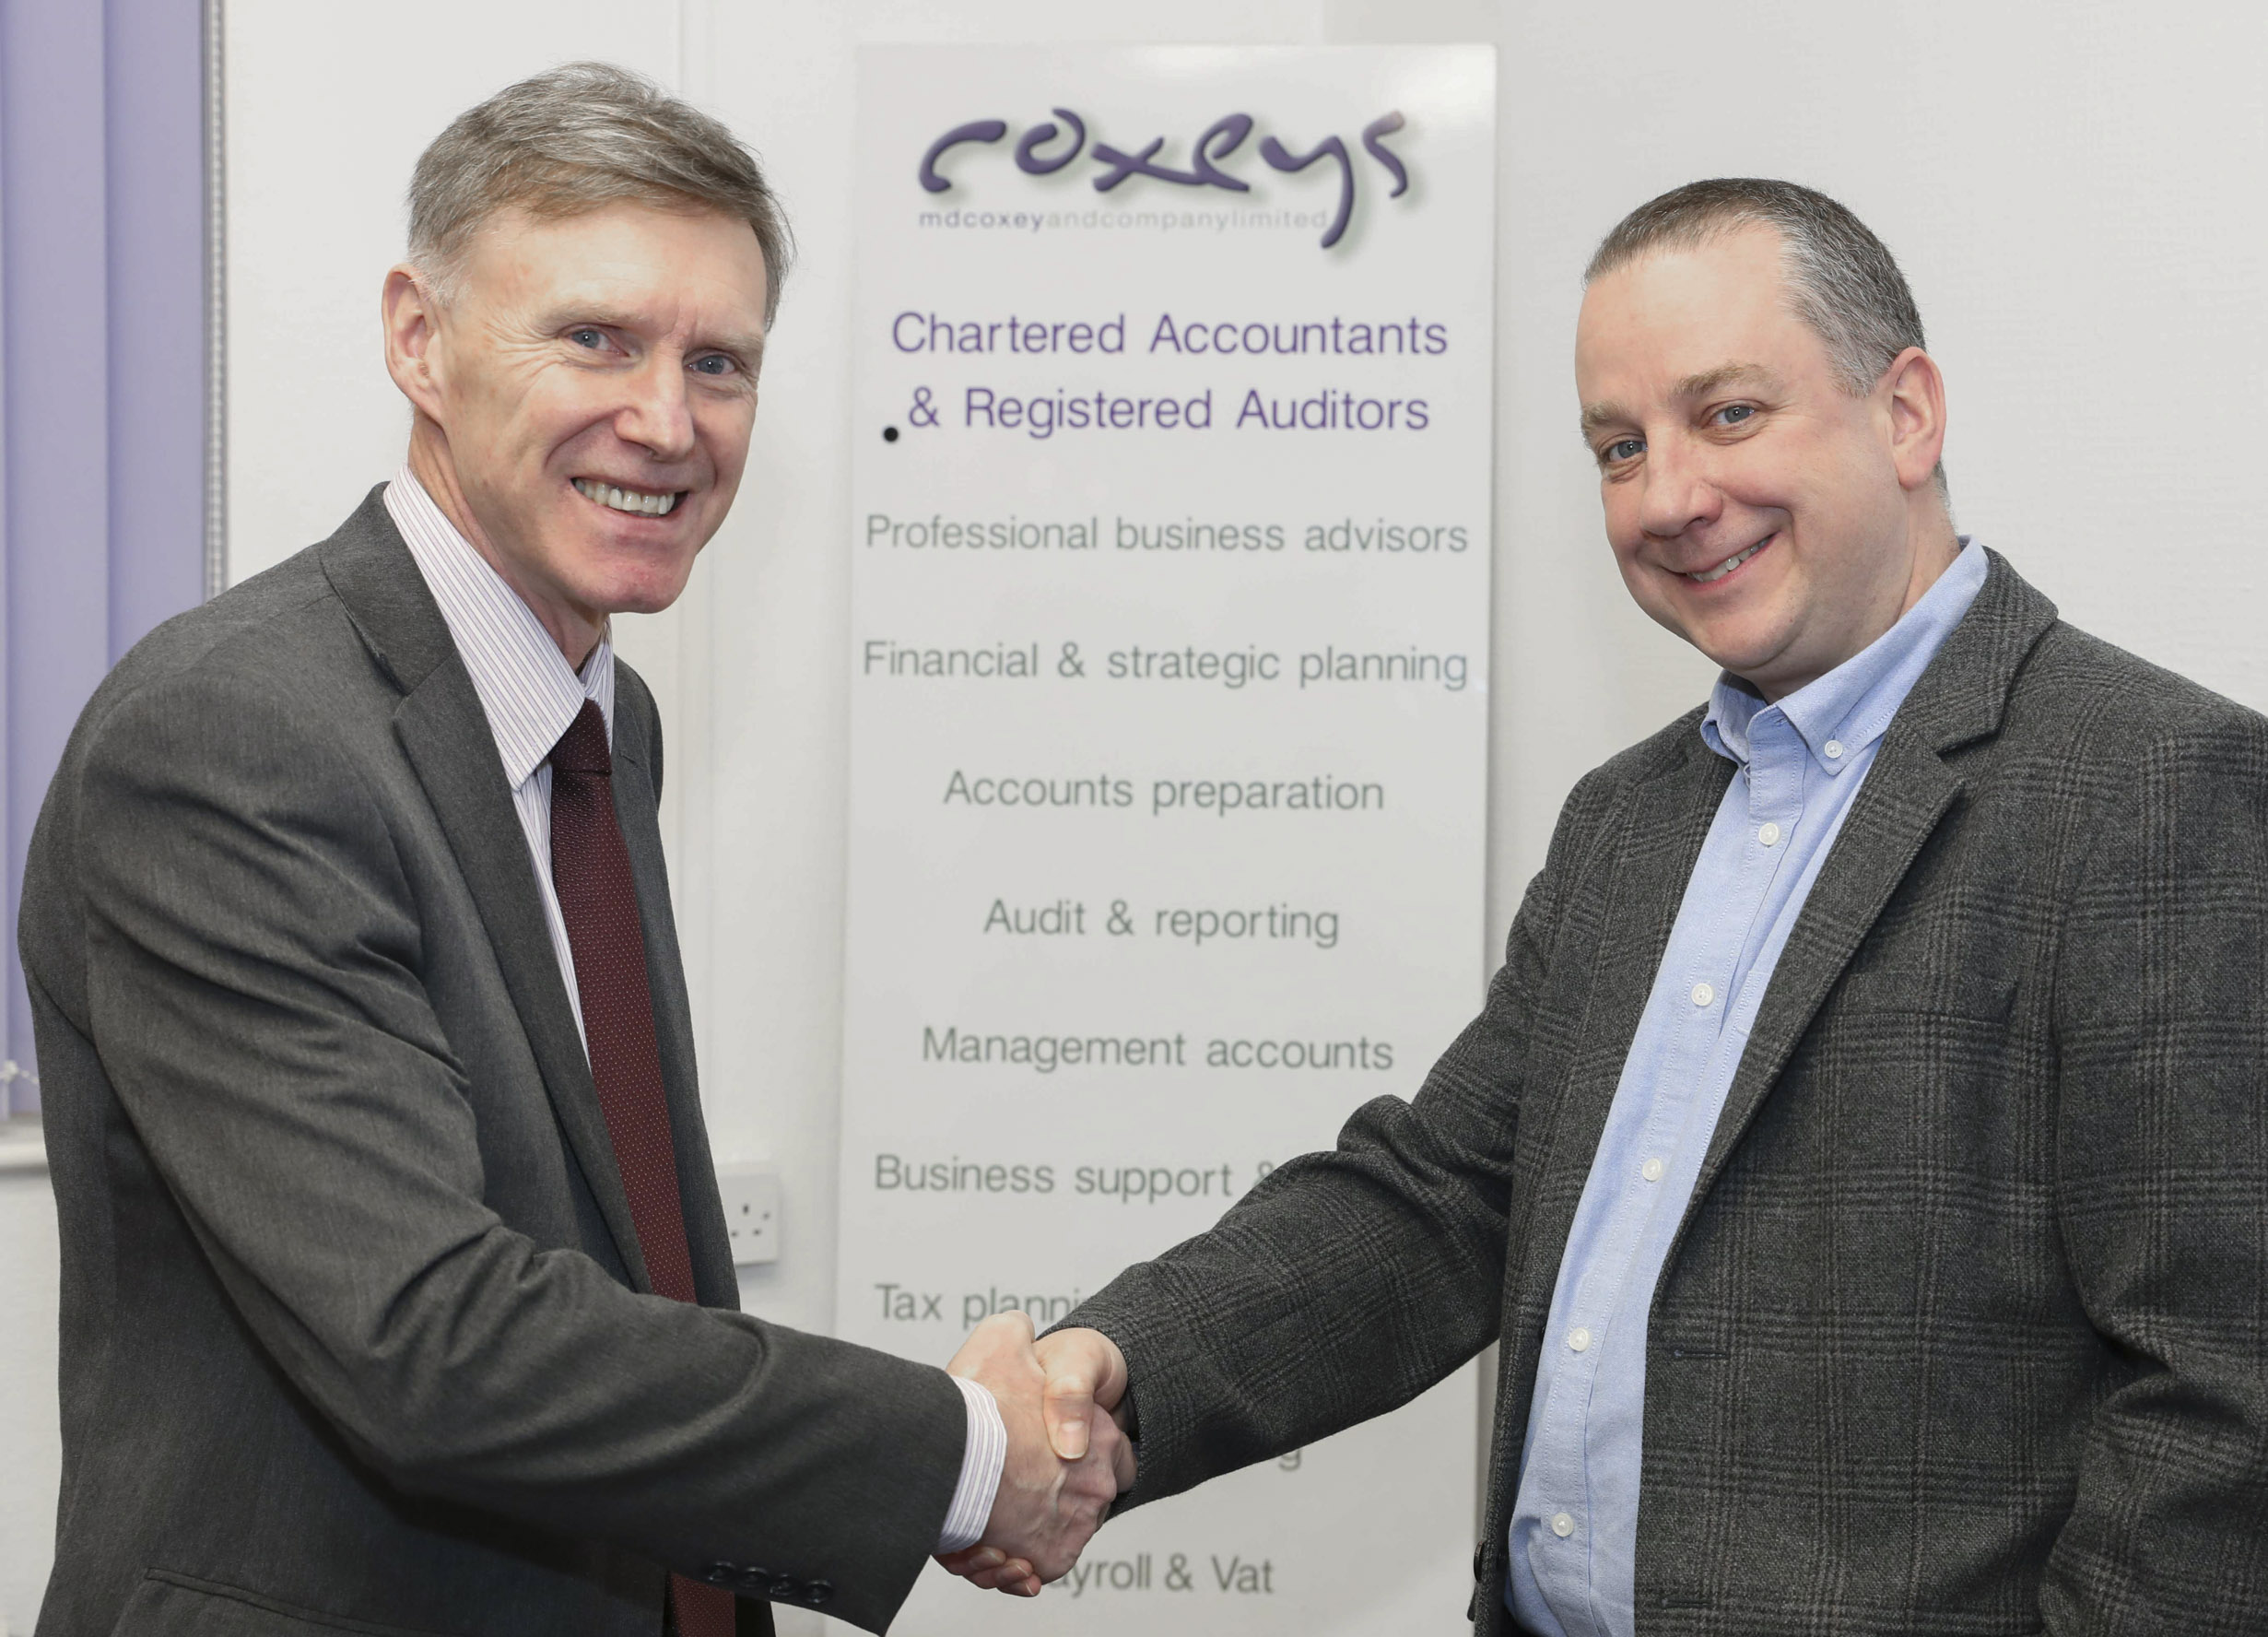 Chester merger adds up to expansion for accountants